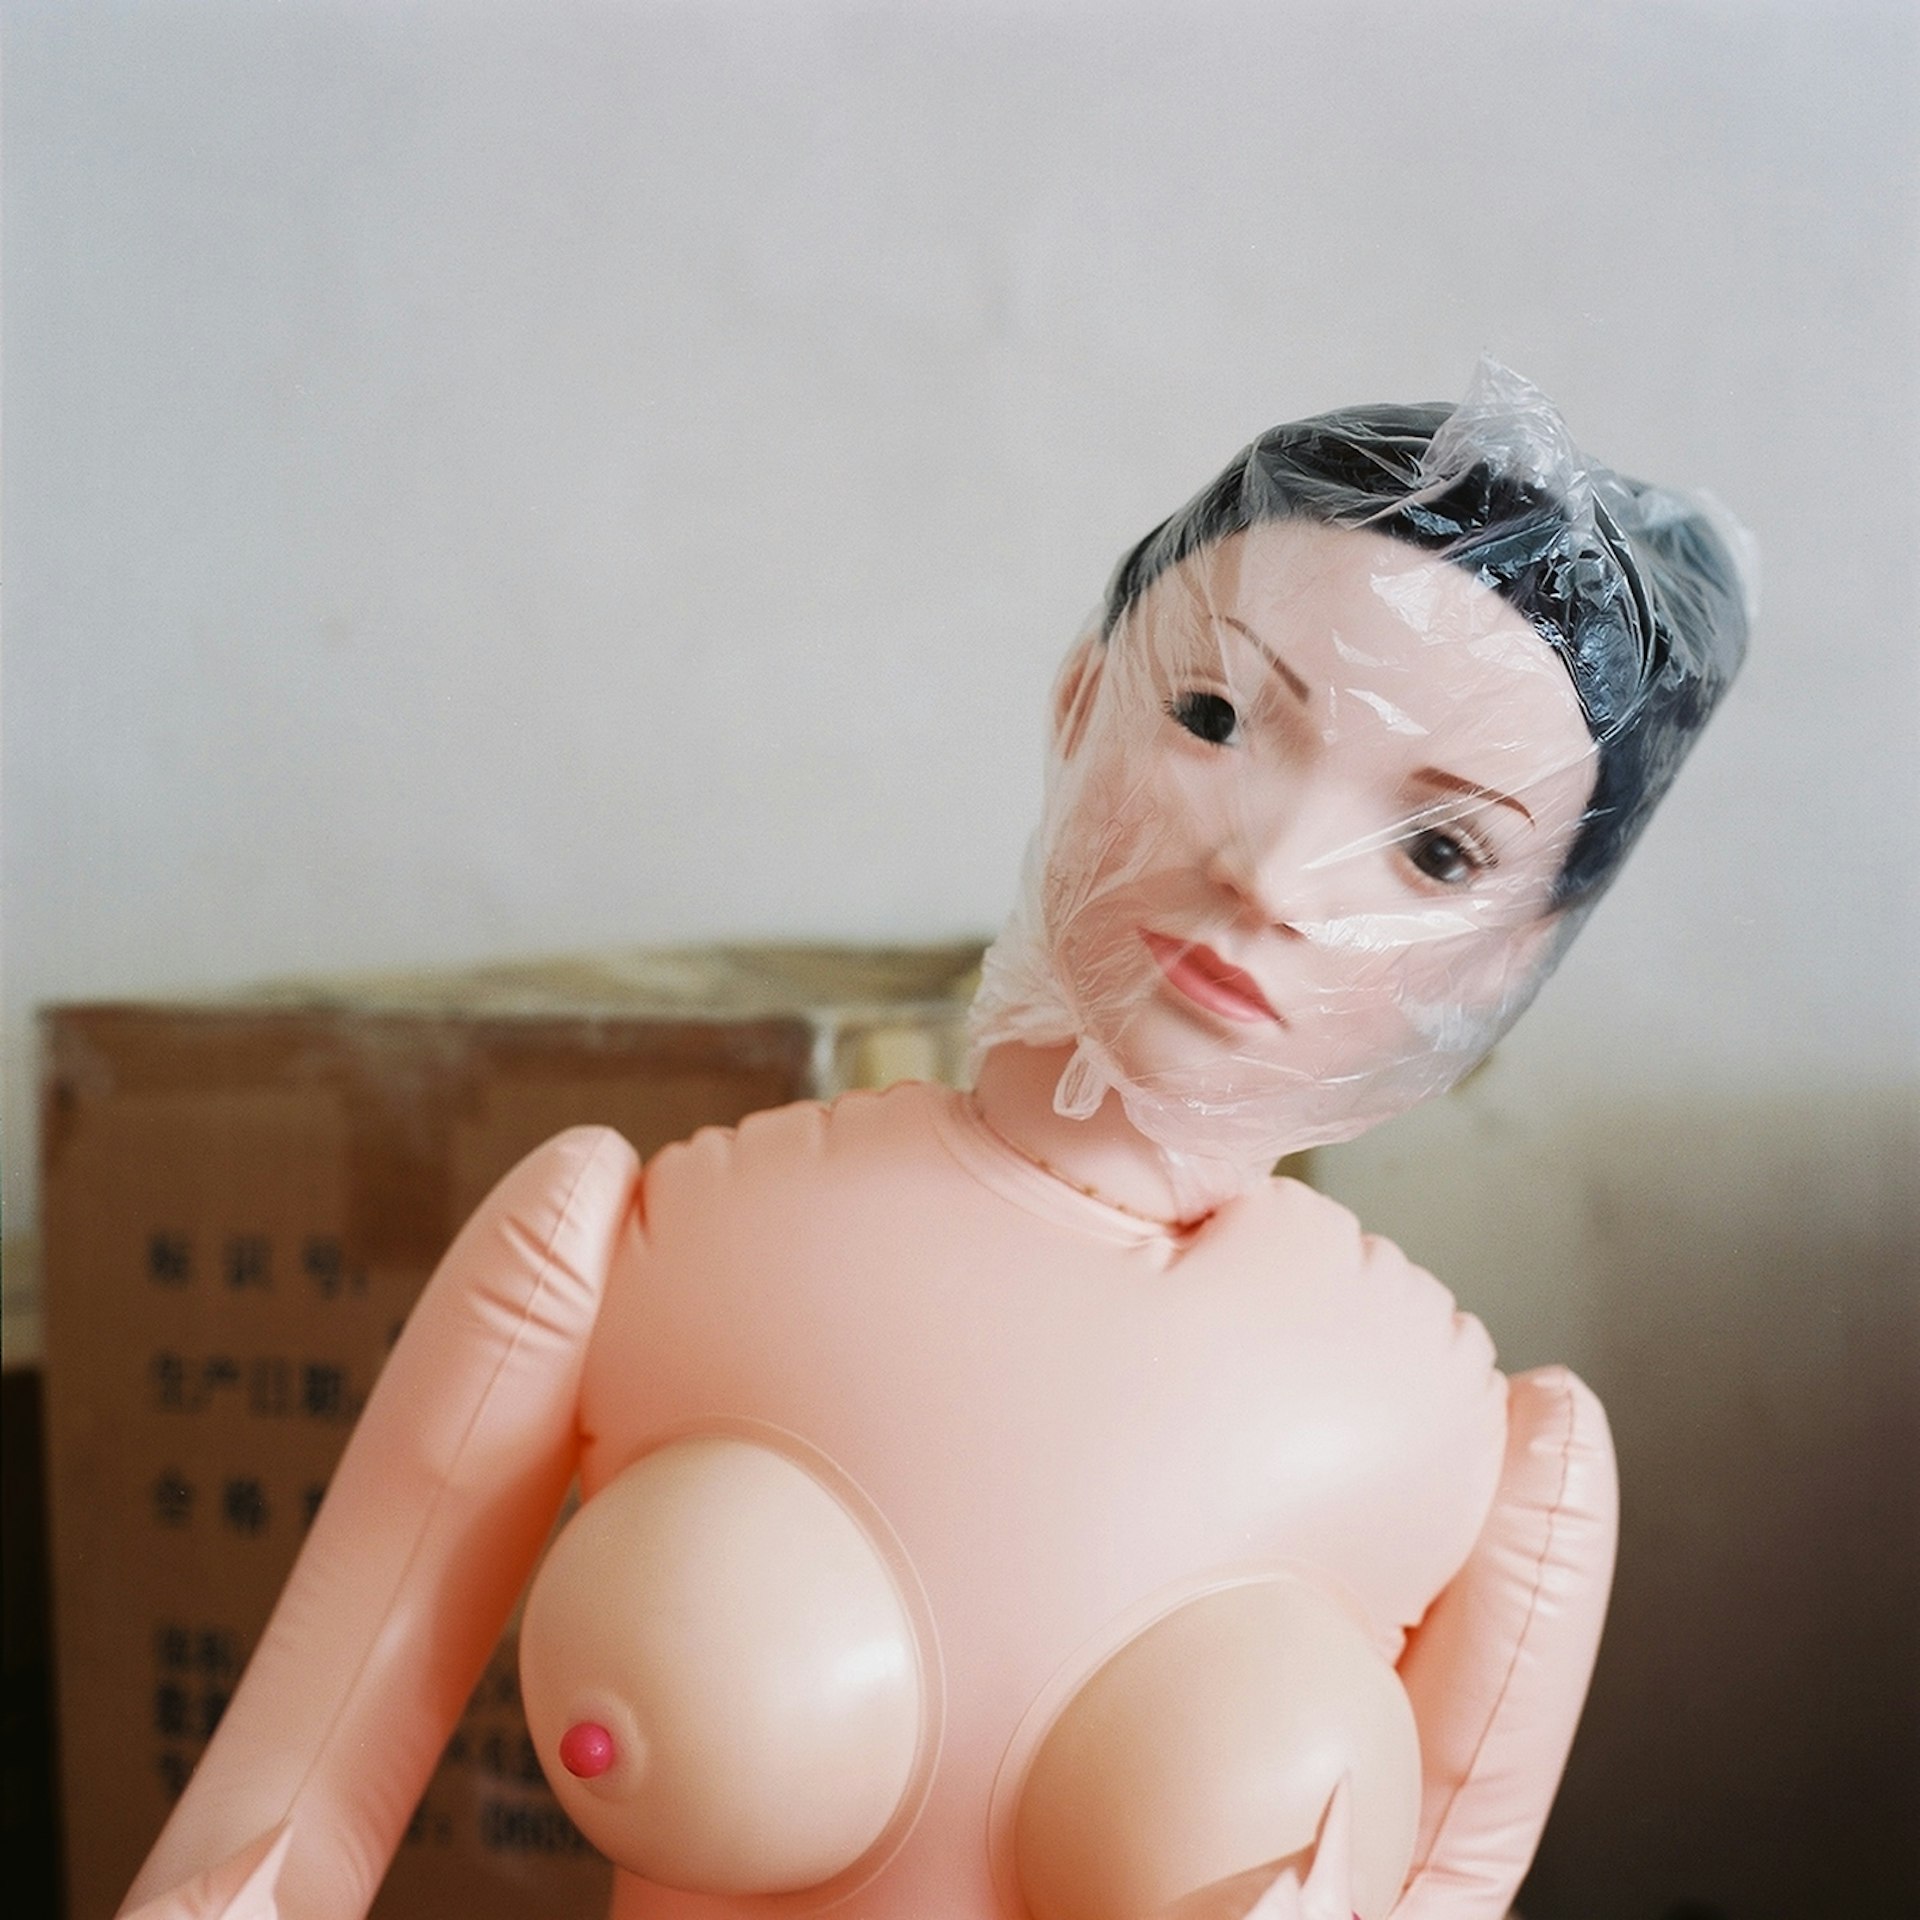 An eerie look inside a Chinese Love Doll factory